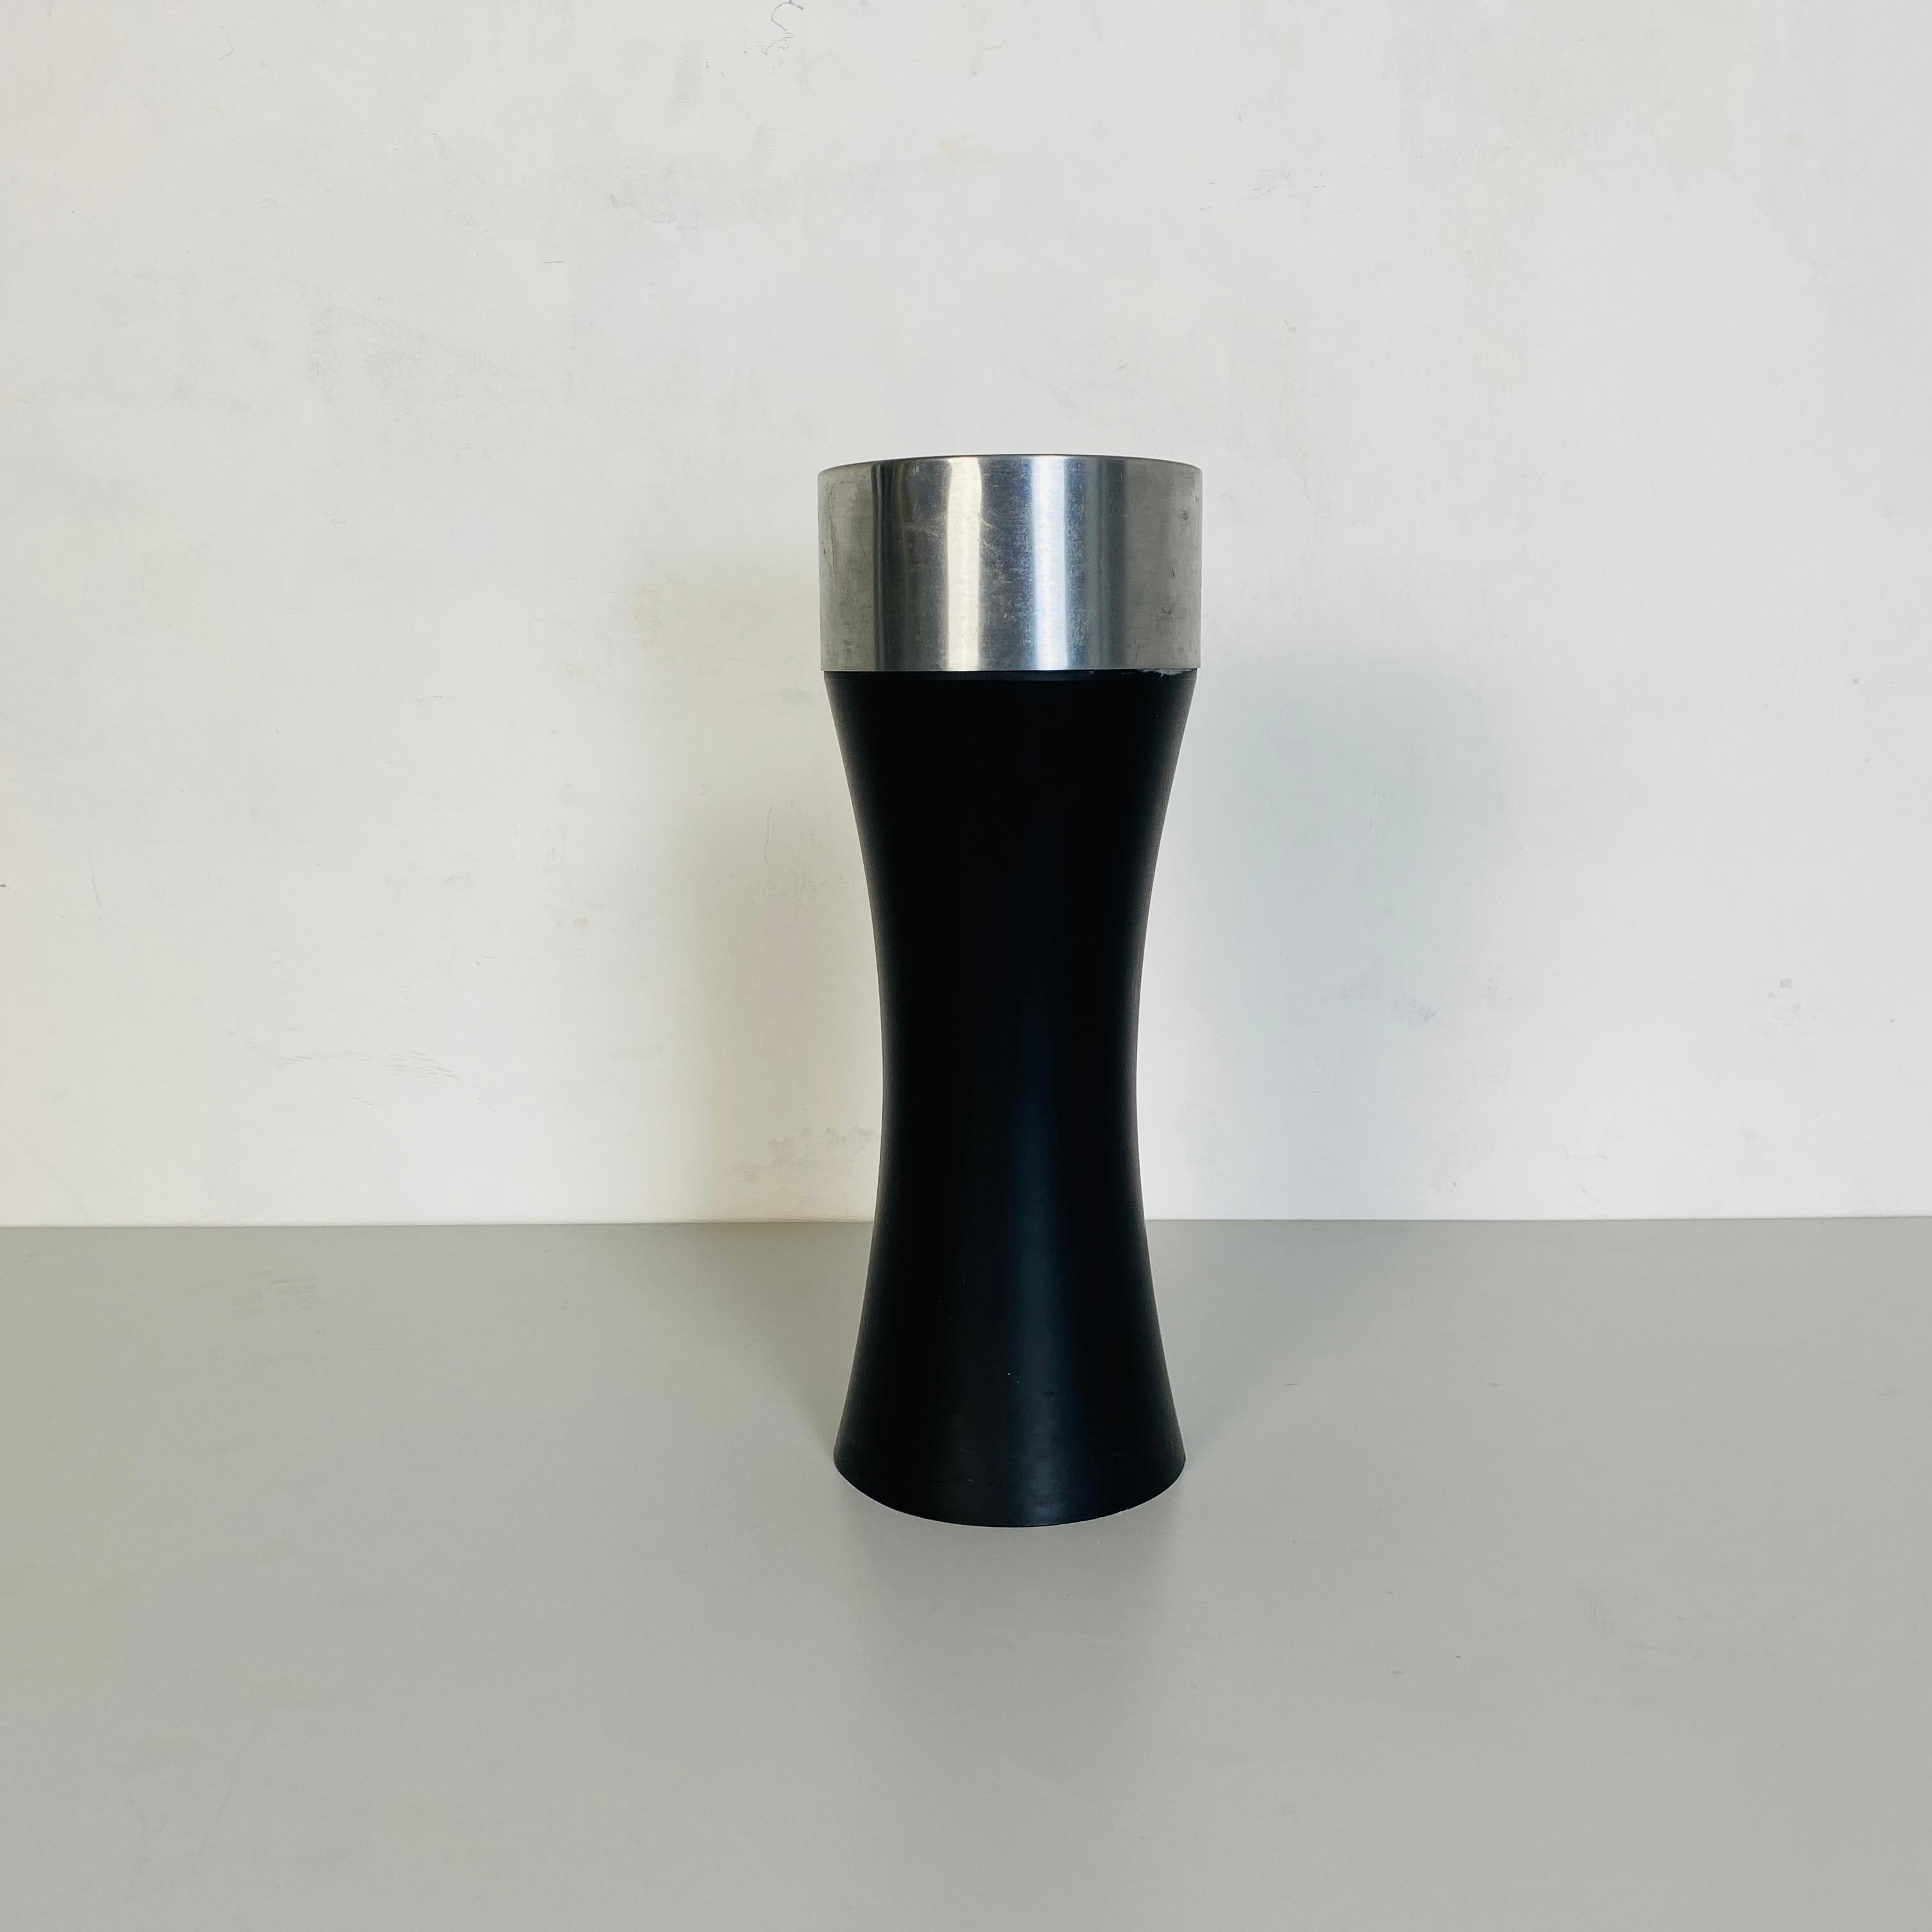 Italian Mid-Century Modern floor steel ashtray, 1970s.
Floor ashtray with metal base painted in matt black and ashtray in brushed steel.
This hourglass shape give a fantastic design to this ashtray.
The tipycal black color is perfect for every